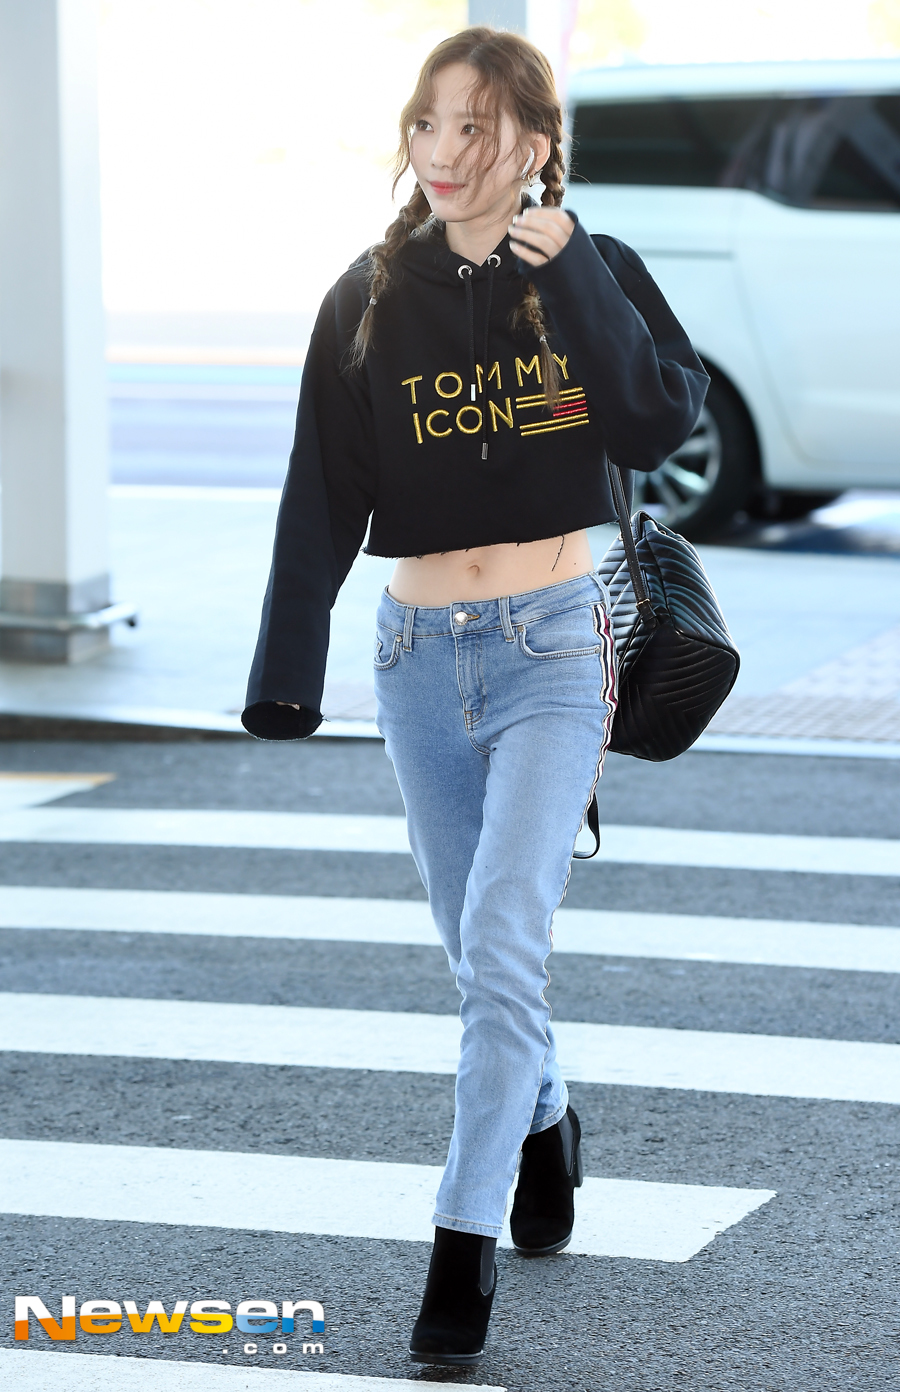 Girls Generation Taeyeon departed for Shanghai, China through the second passenger terminal of Incheon International Airport on September 4th to attend the Fashion show.Taeyeon is heading for the departure hall on the day.Jung Yoo-jin